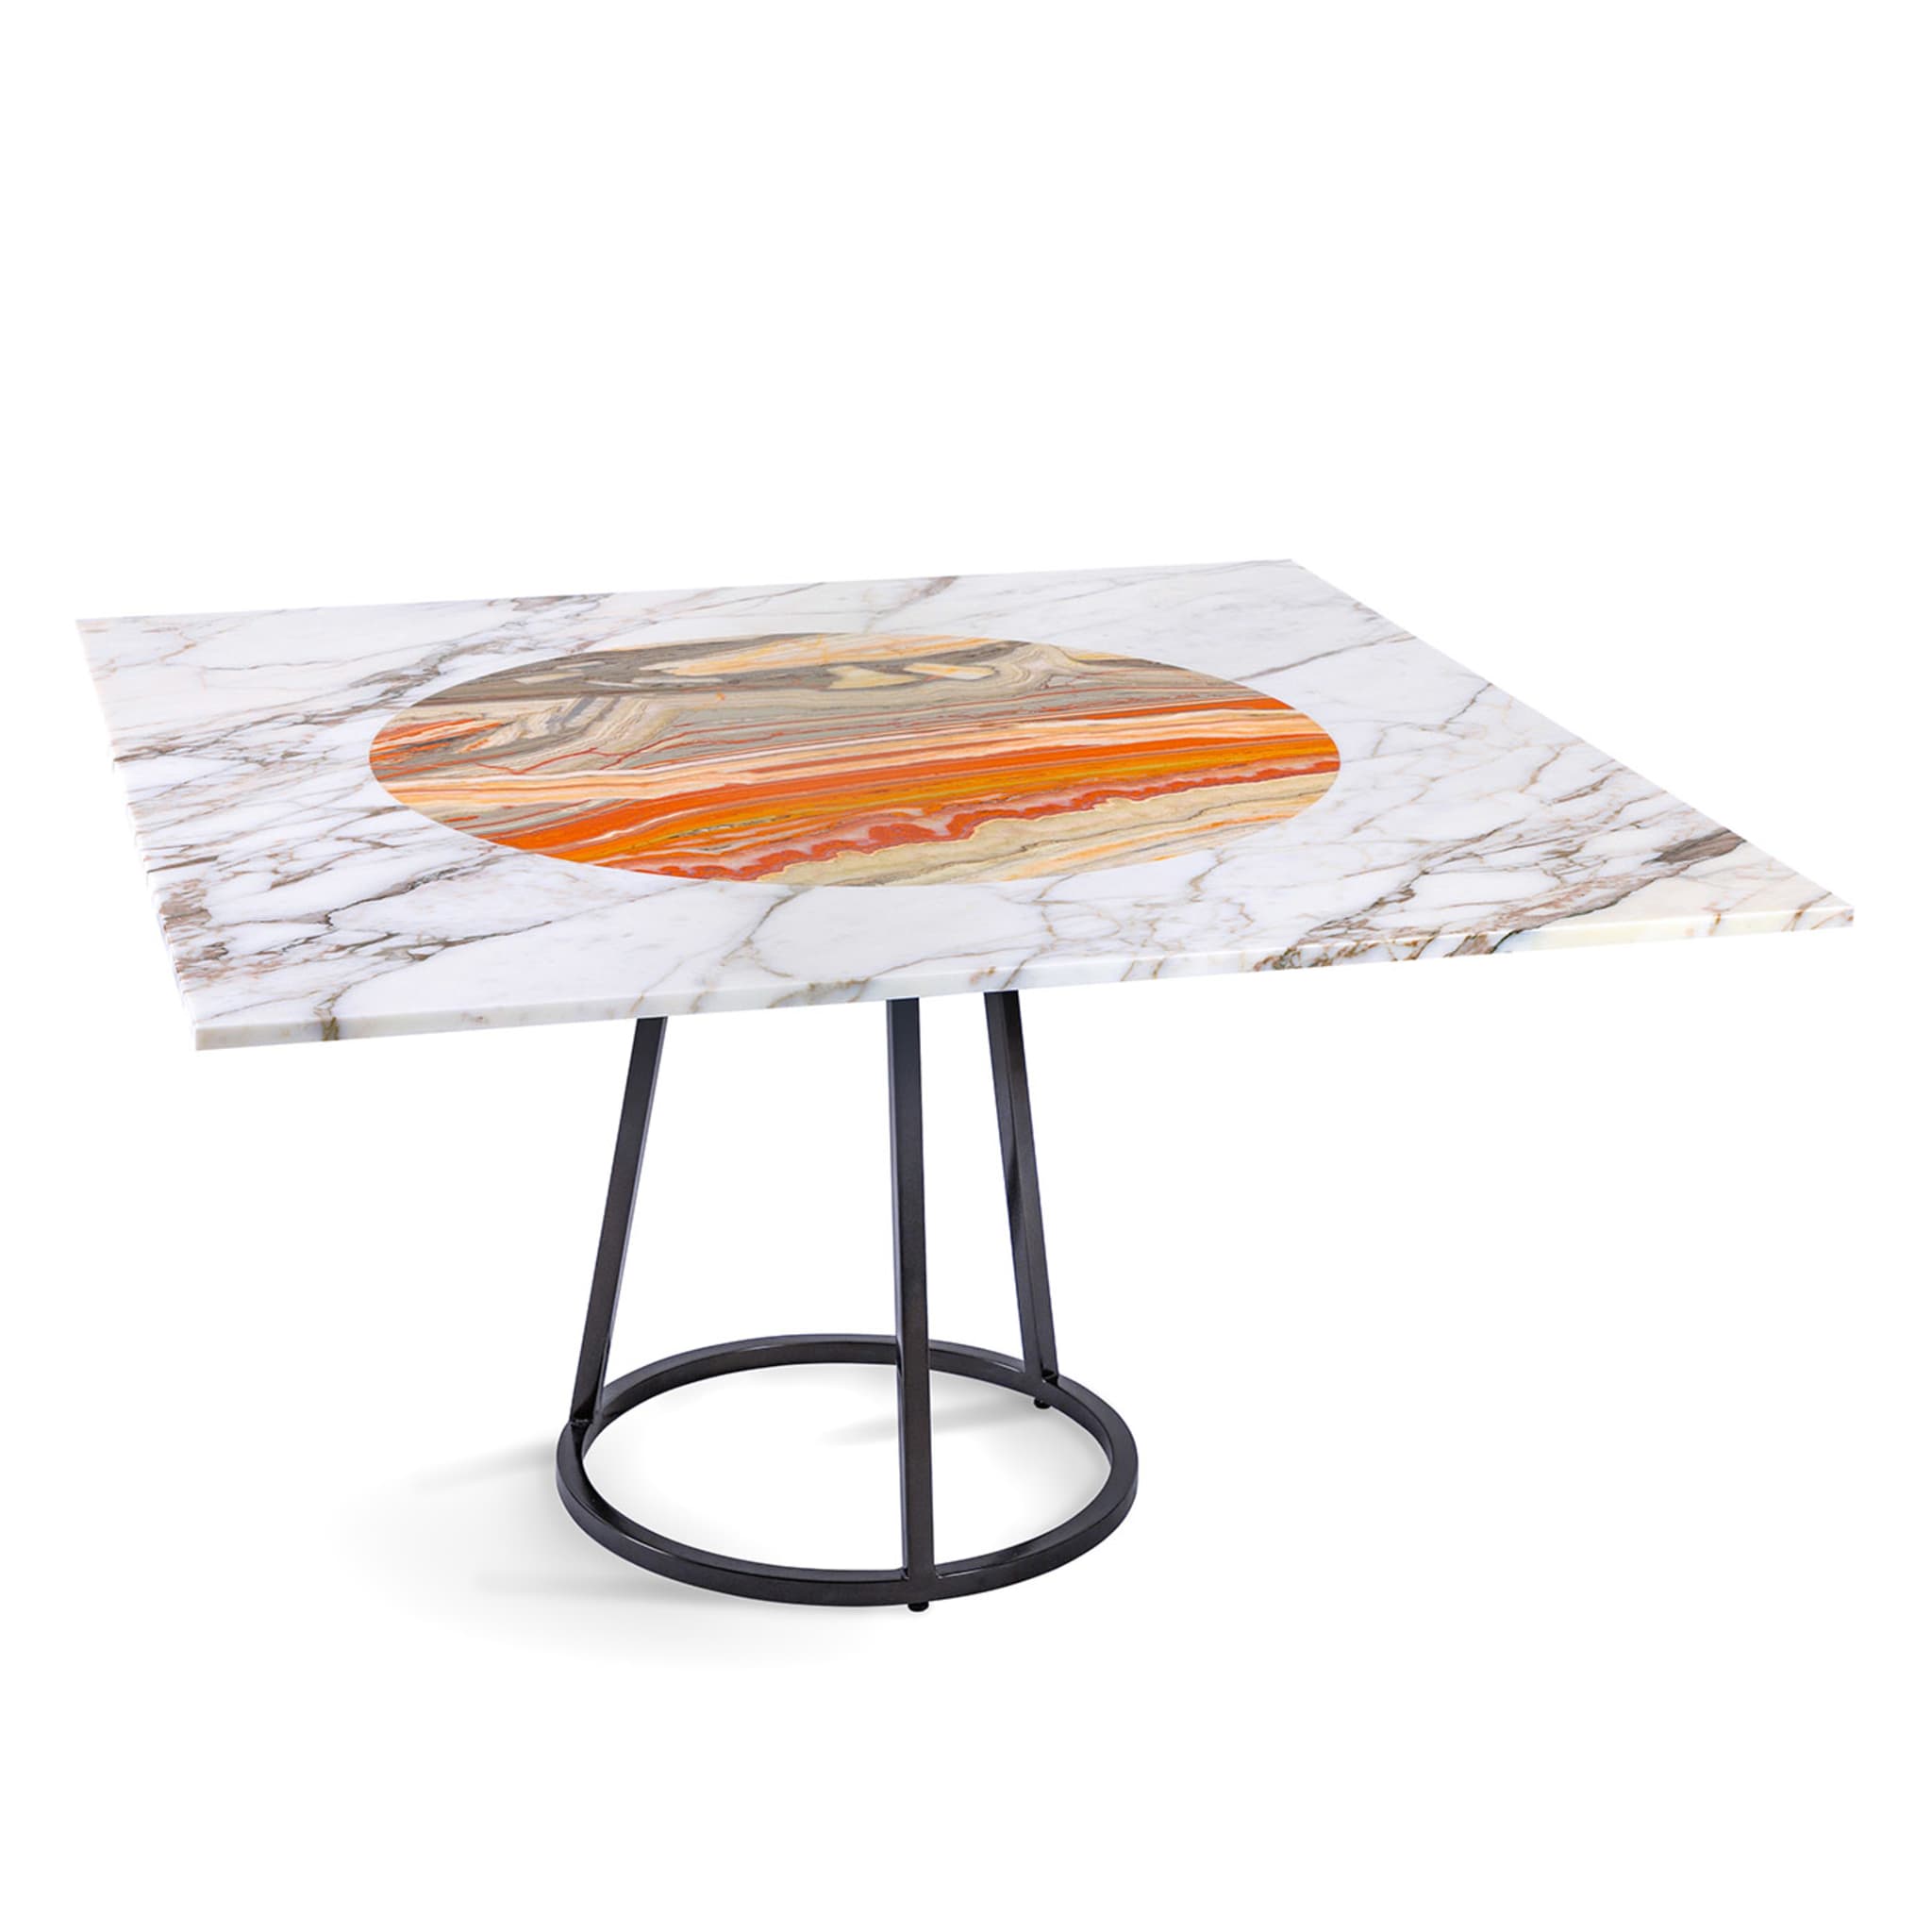 Pantheon Square Polychrome Table by Maarten De Ceulaer - Alternative view 1